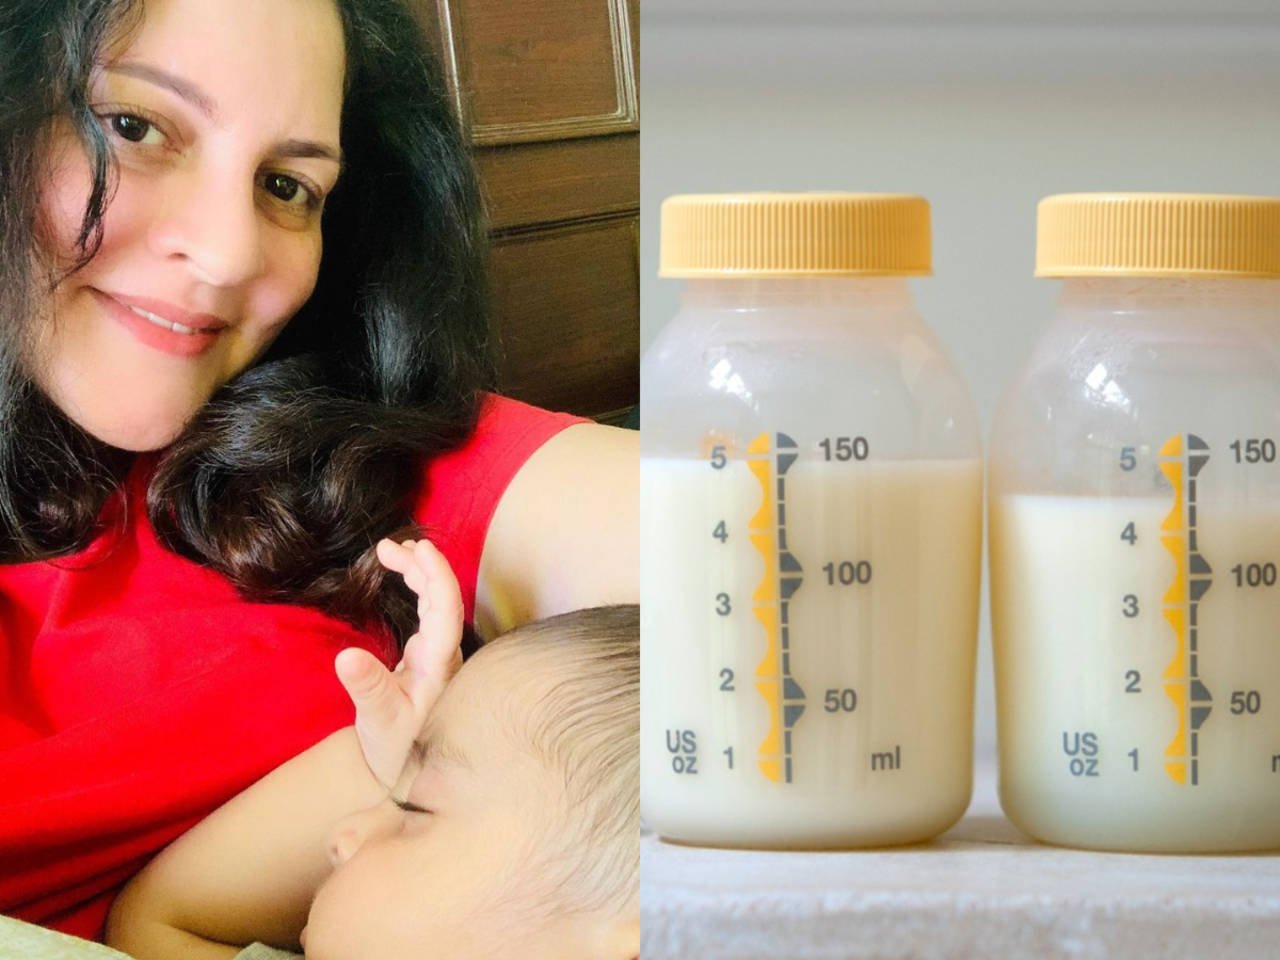 Mothers Day special By donating her breast milk, this mother is giving life to so many babies pic